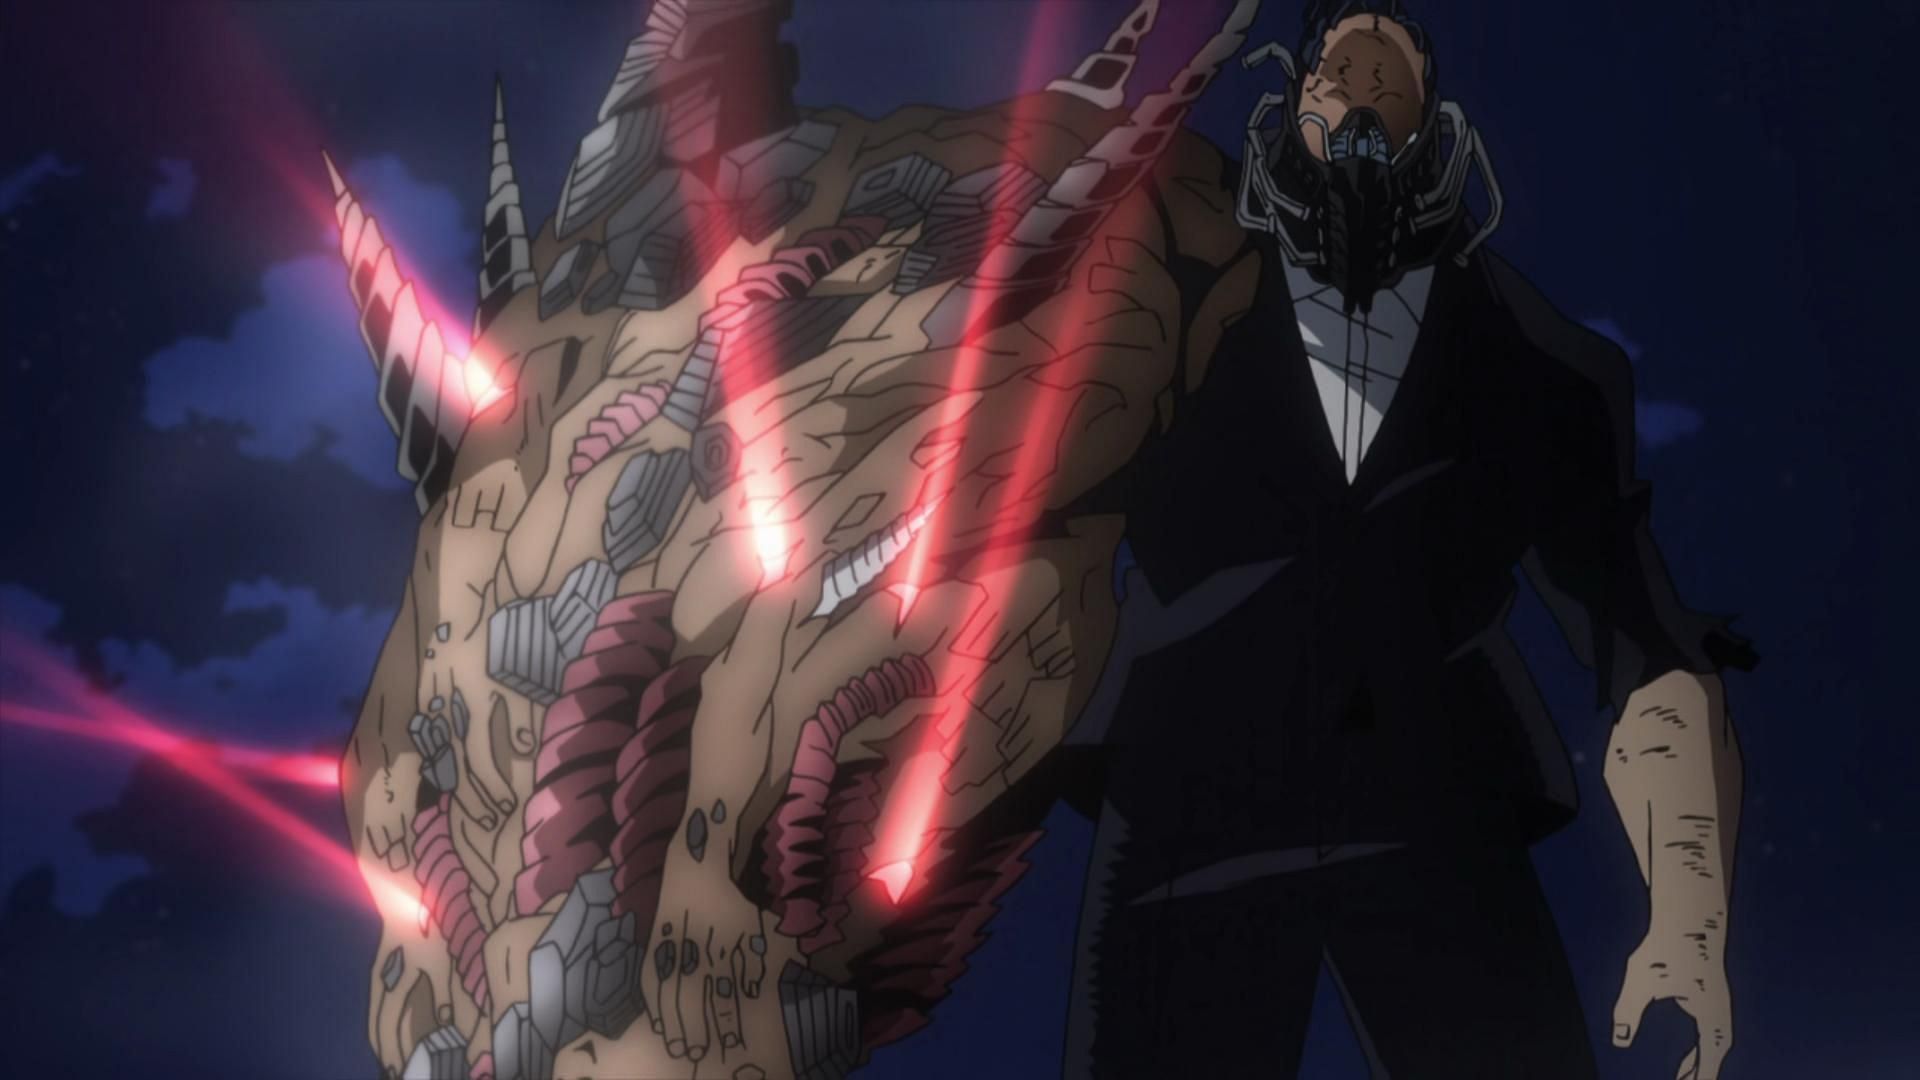 All For One as seen in the anime series (Image via Bones)